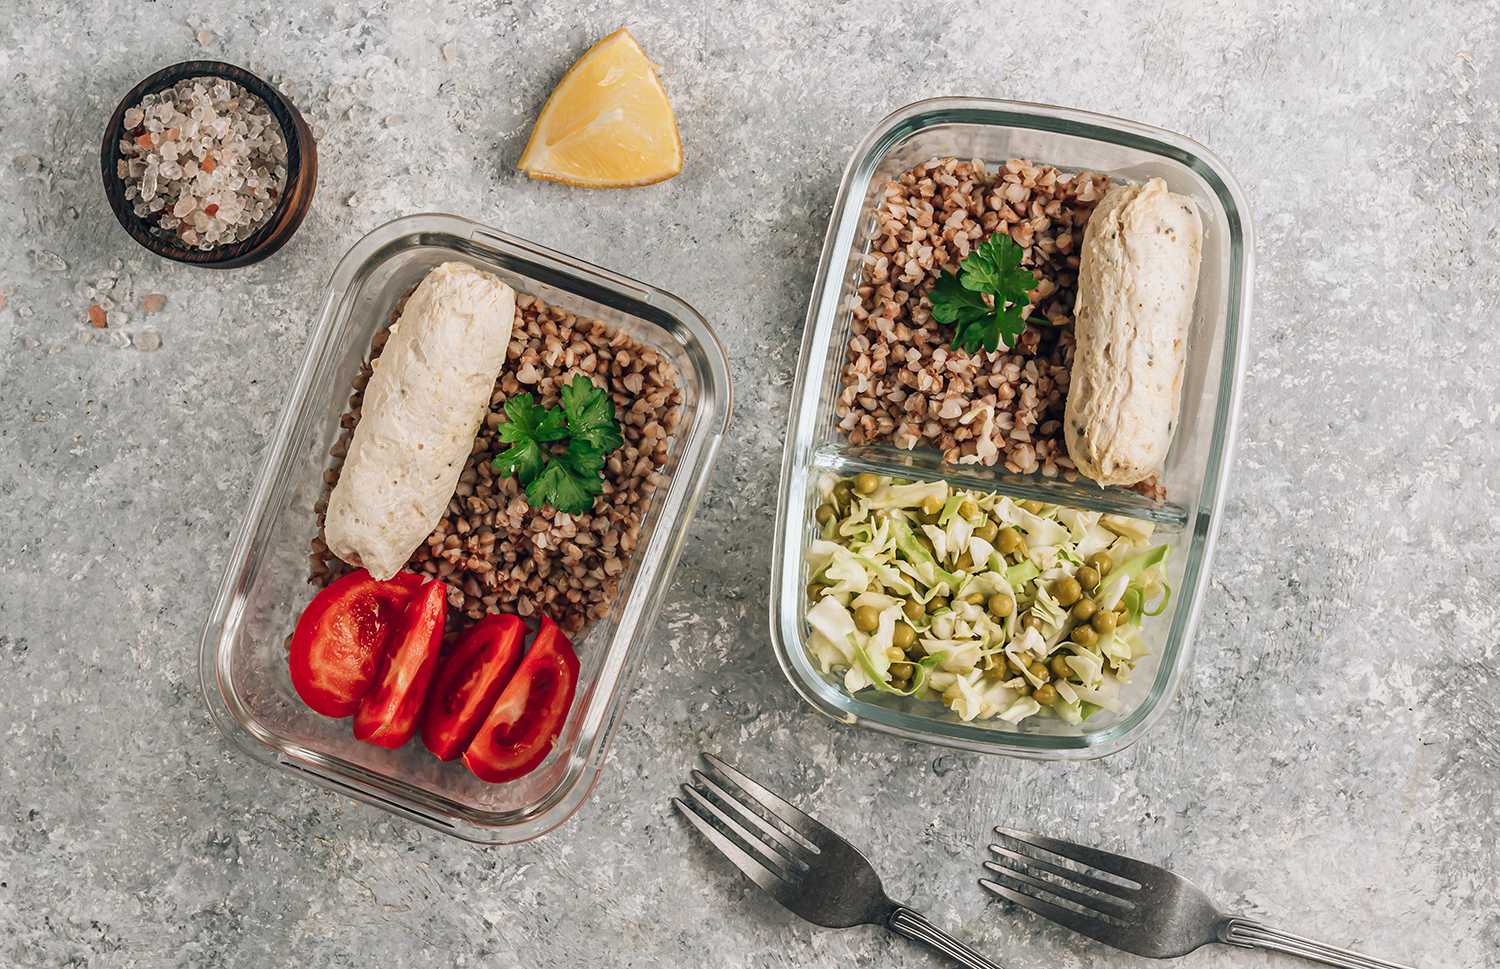 Beginner's Tips for Successful Meal Prepping